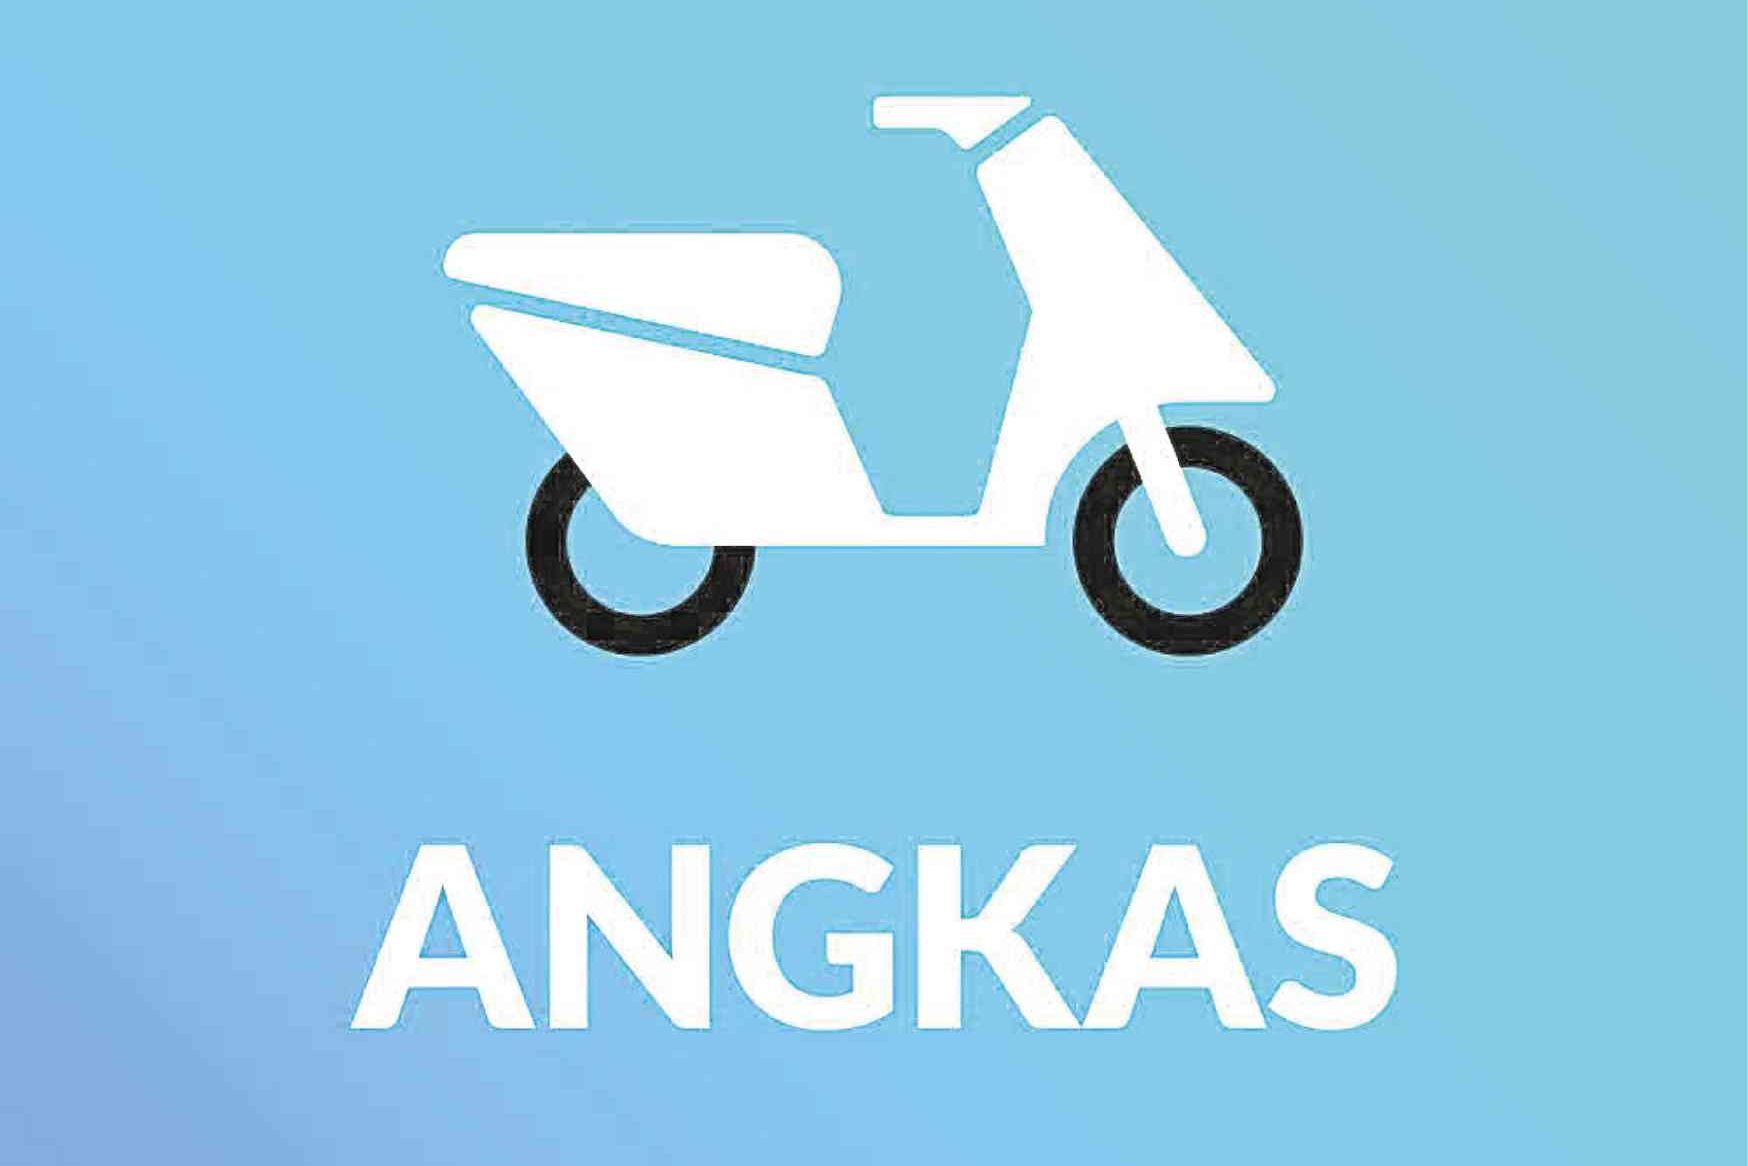 LTFRB to traffic law enforcers: Impound Angkas motorcycles